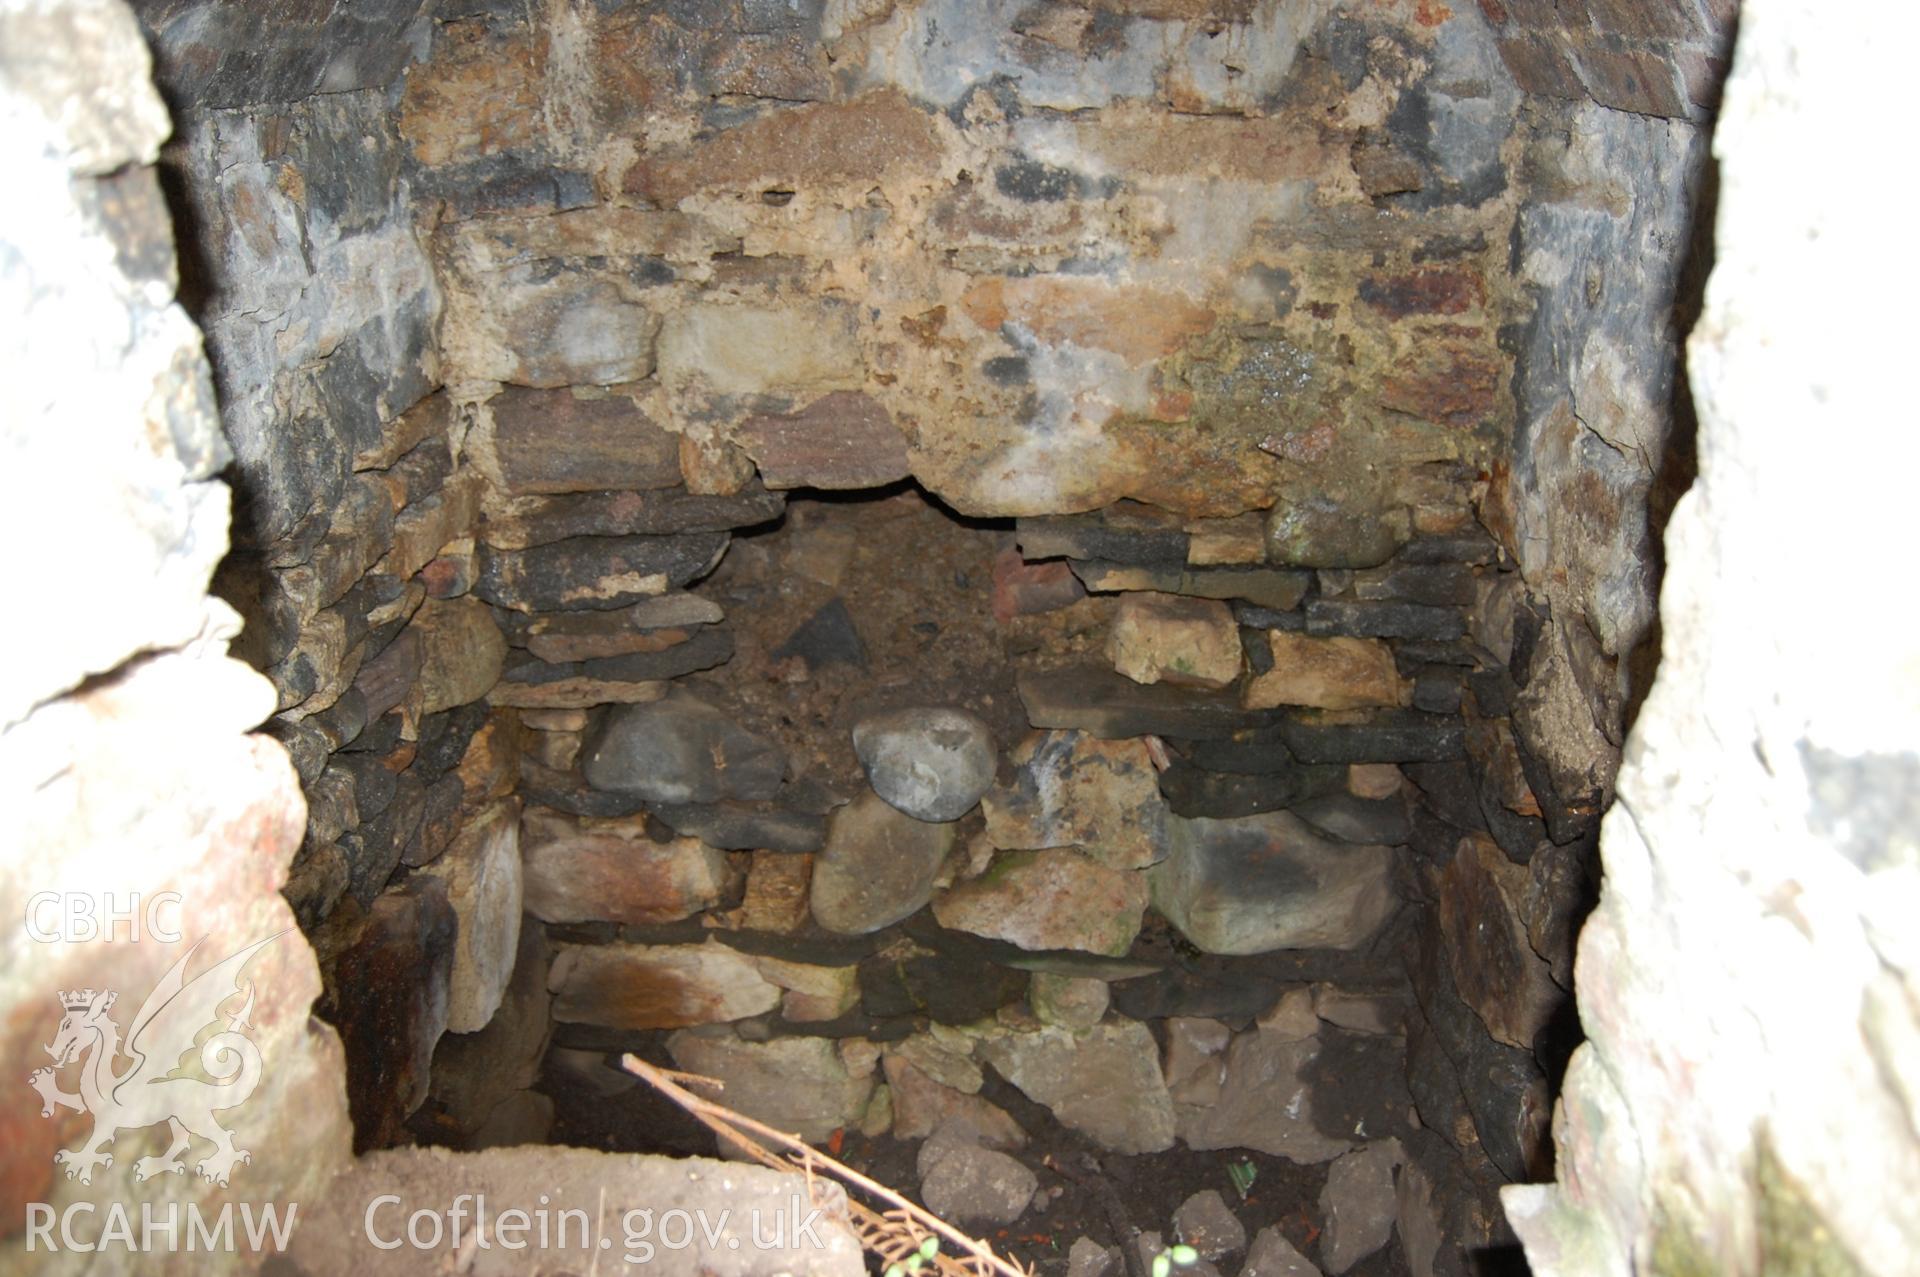 Digital photograph from an archaeological assessment of Deganwy Castle, carried out by Gwynedd Archaeological Trust, 2009. Well/tank.